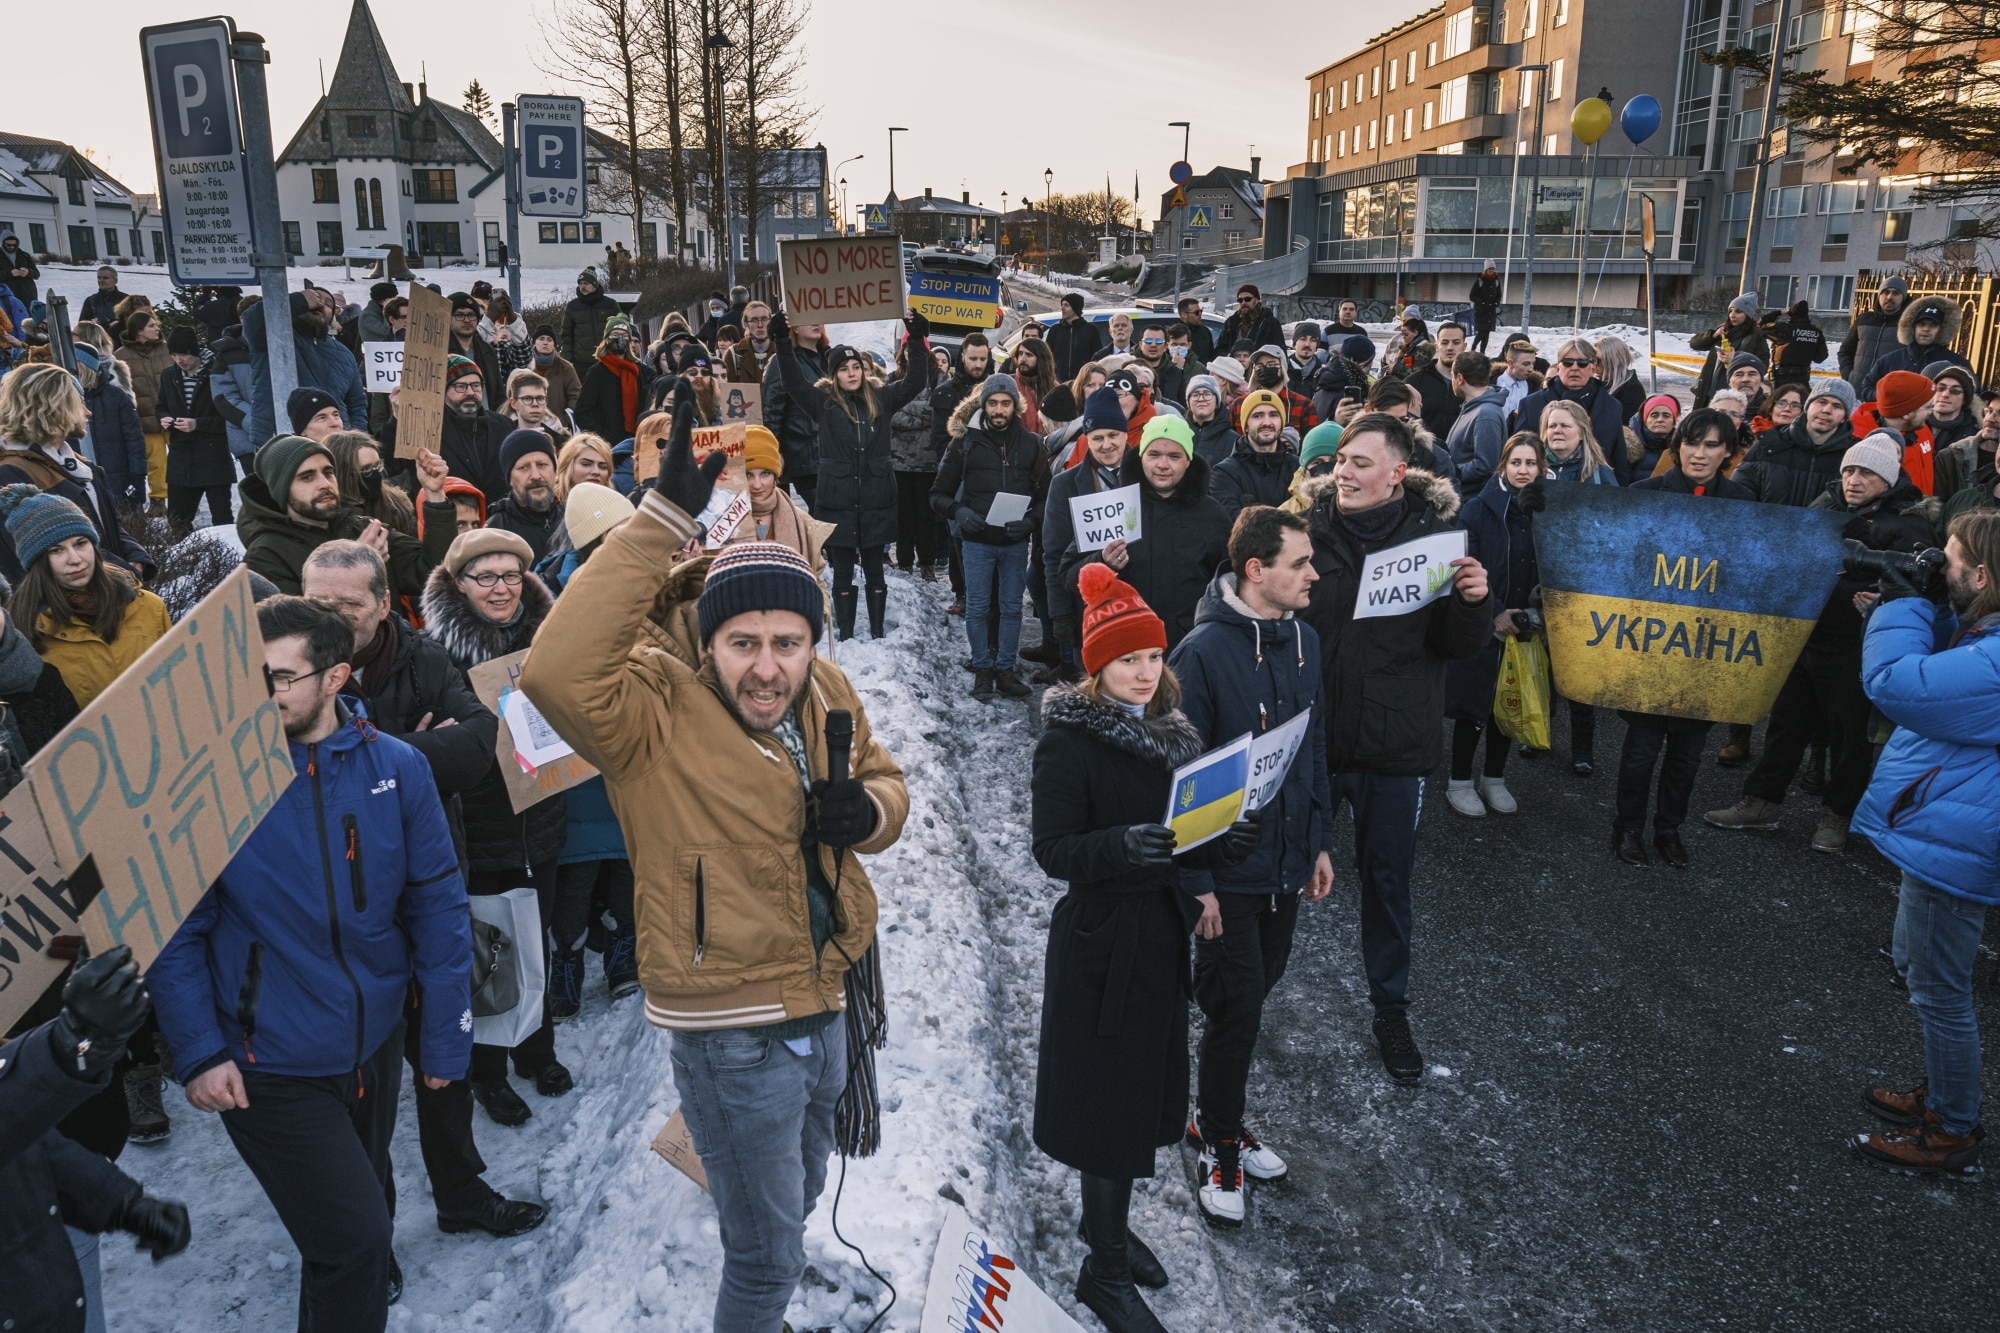 Nearly All Icelanders Believe War Crimes Have Been Committed in Ukraine